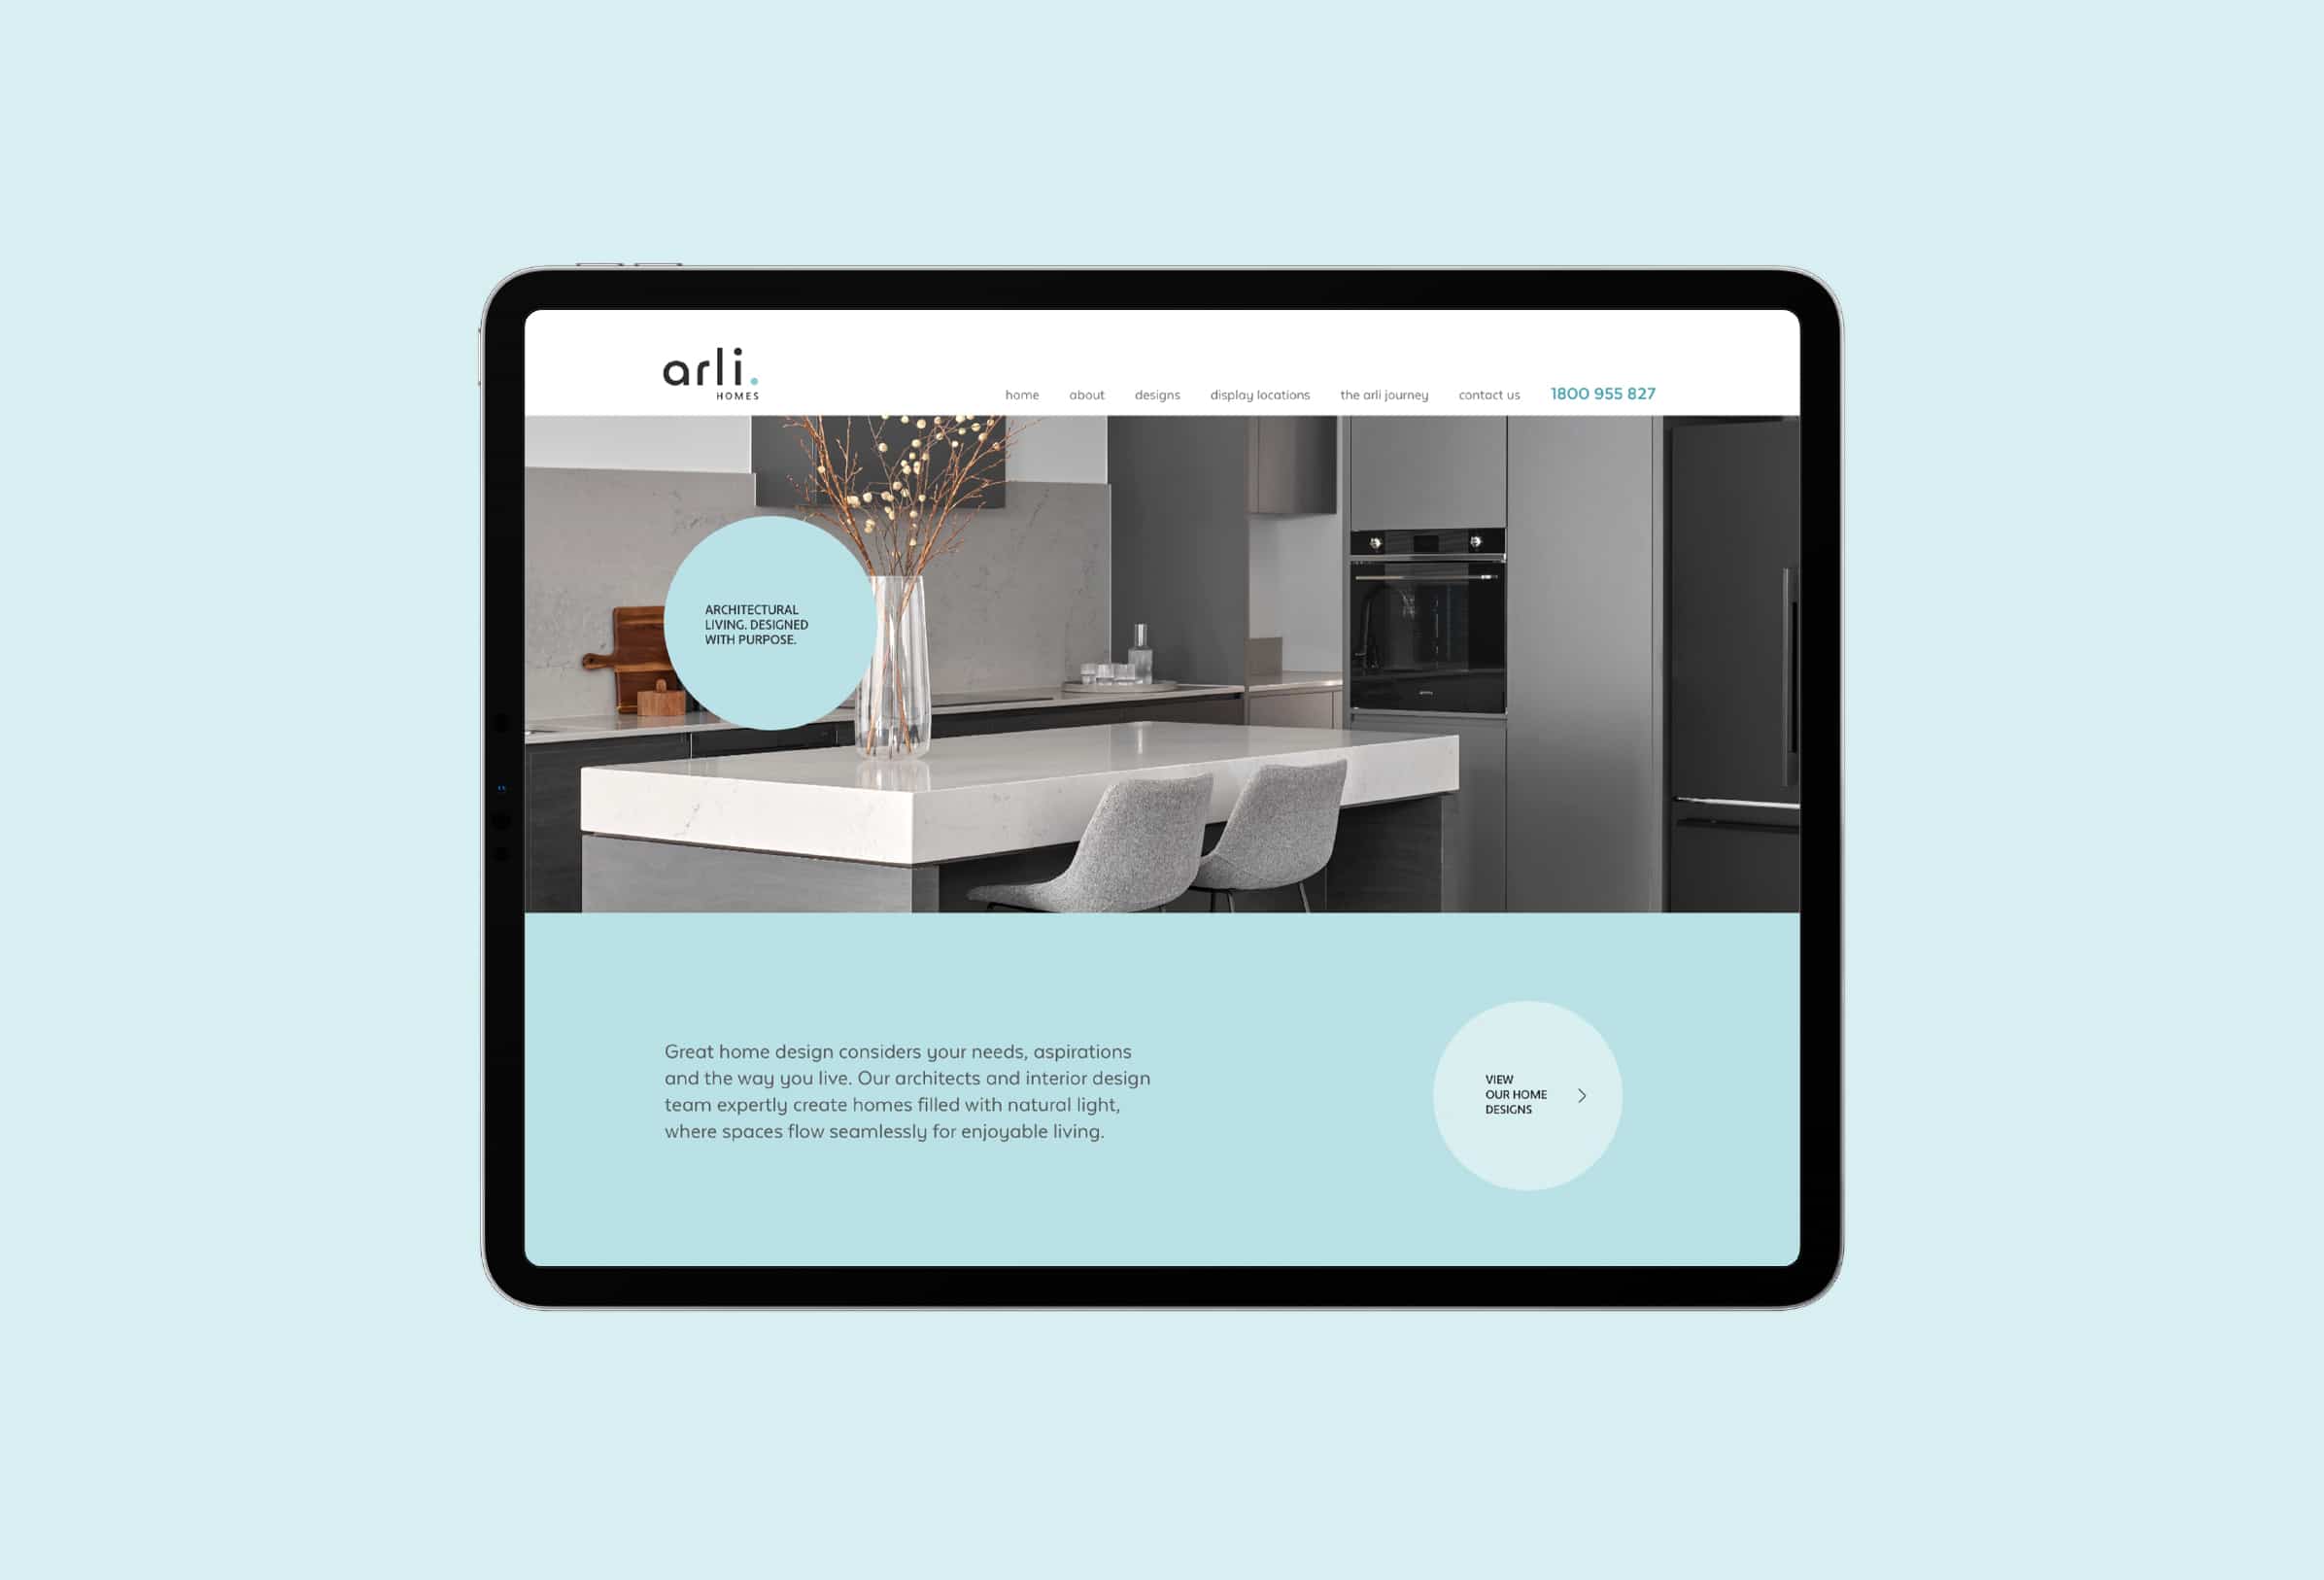 Arli Homes – Liquid Creativity’s brand design service launched this Melbourne-based home builder